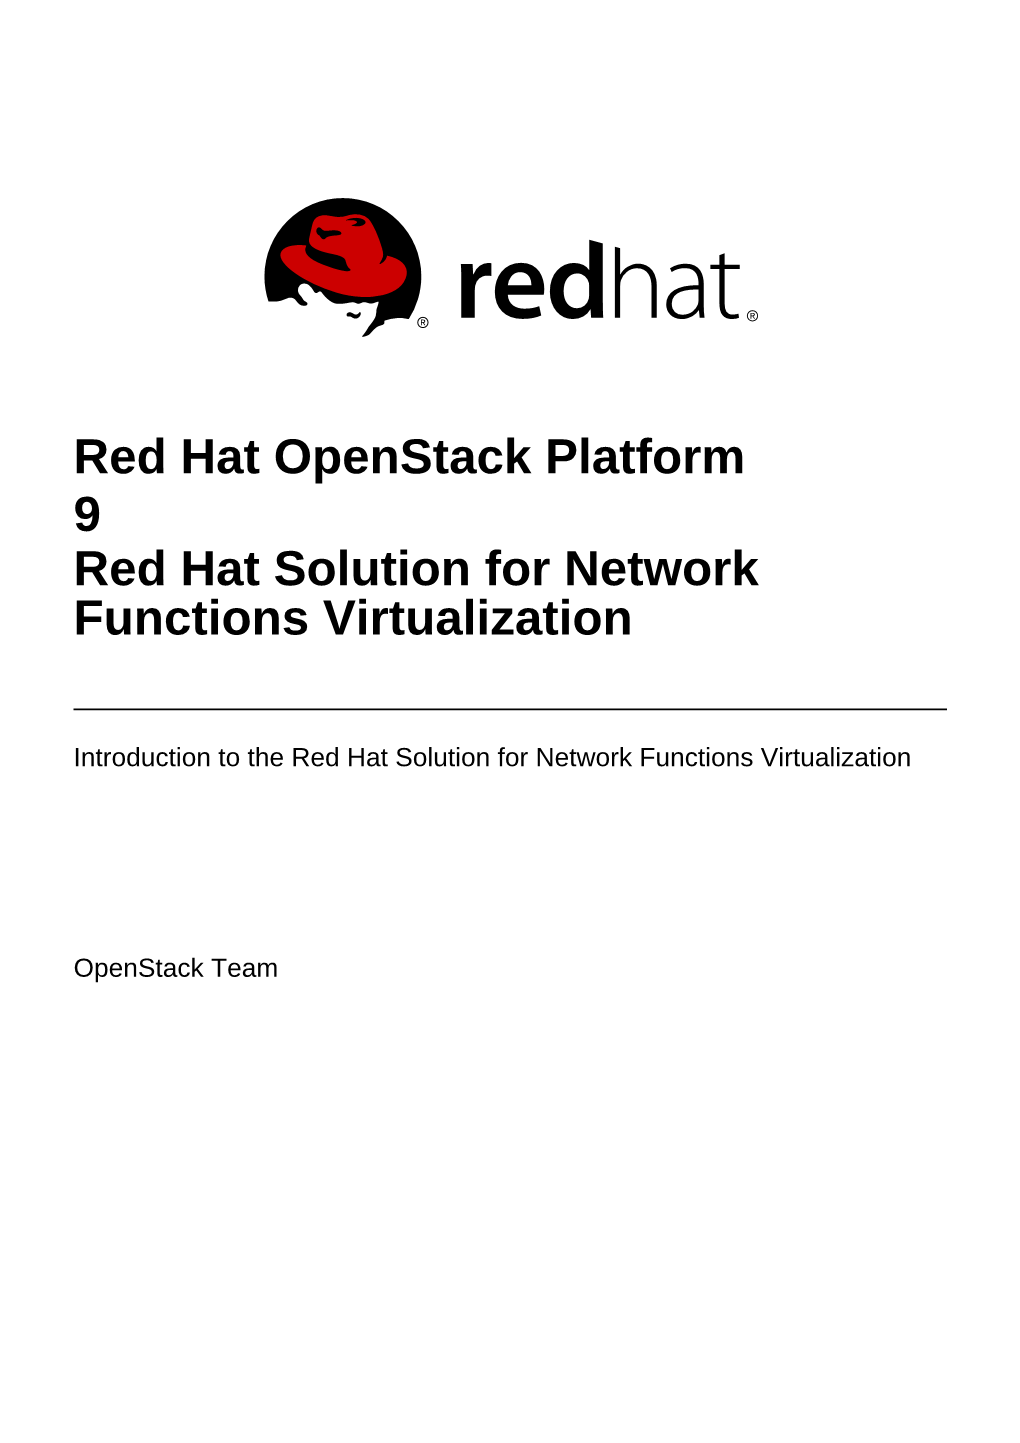 Red Hat Openstack Platform 9 Red Hat Solution for Network Functions Virtualization